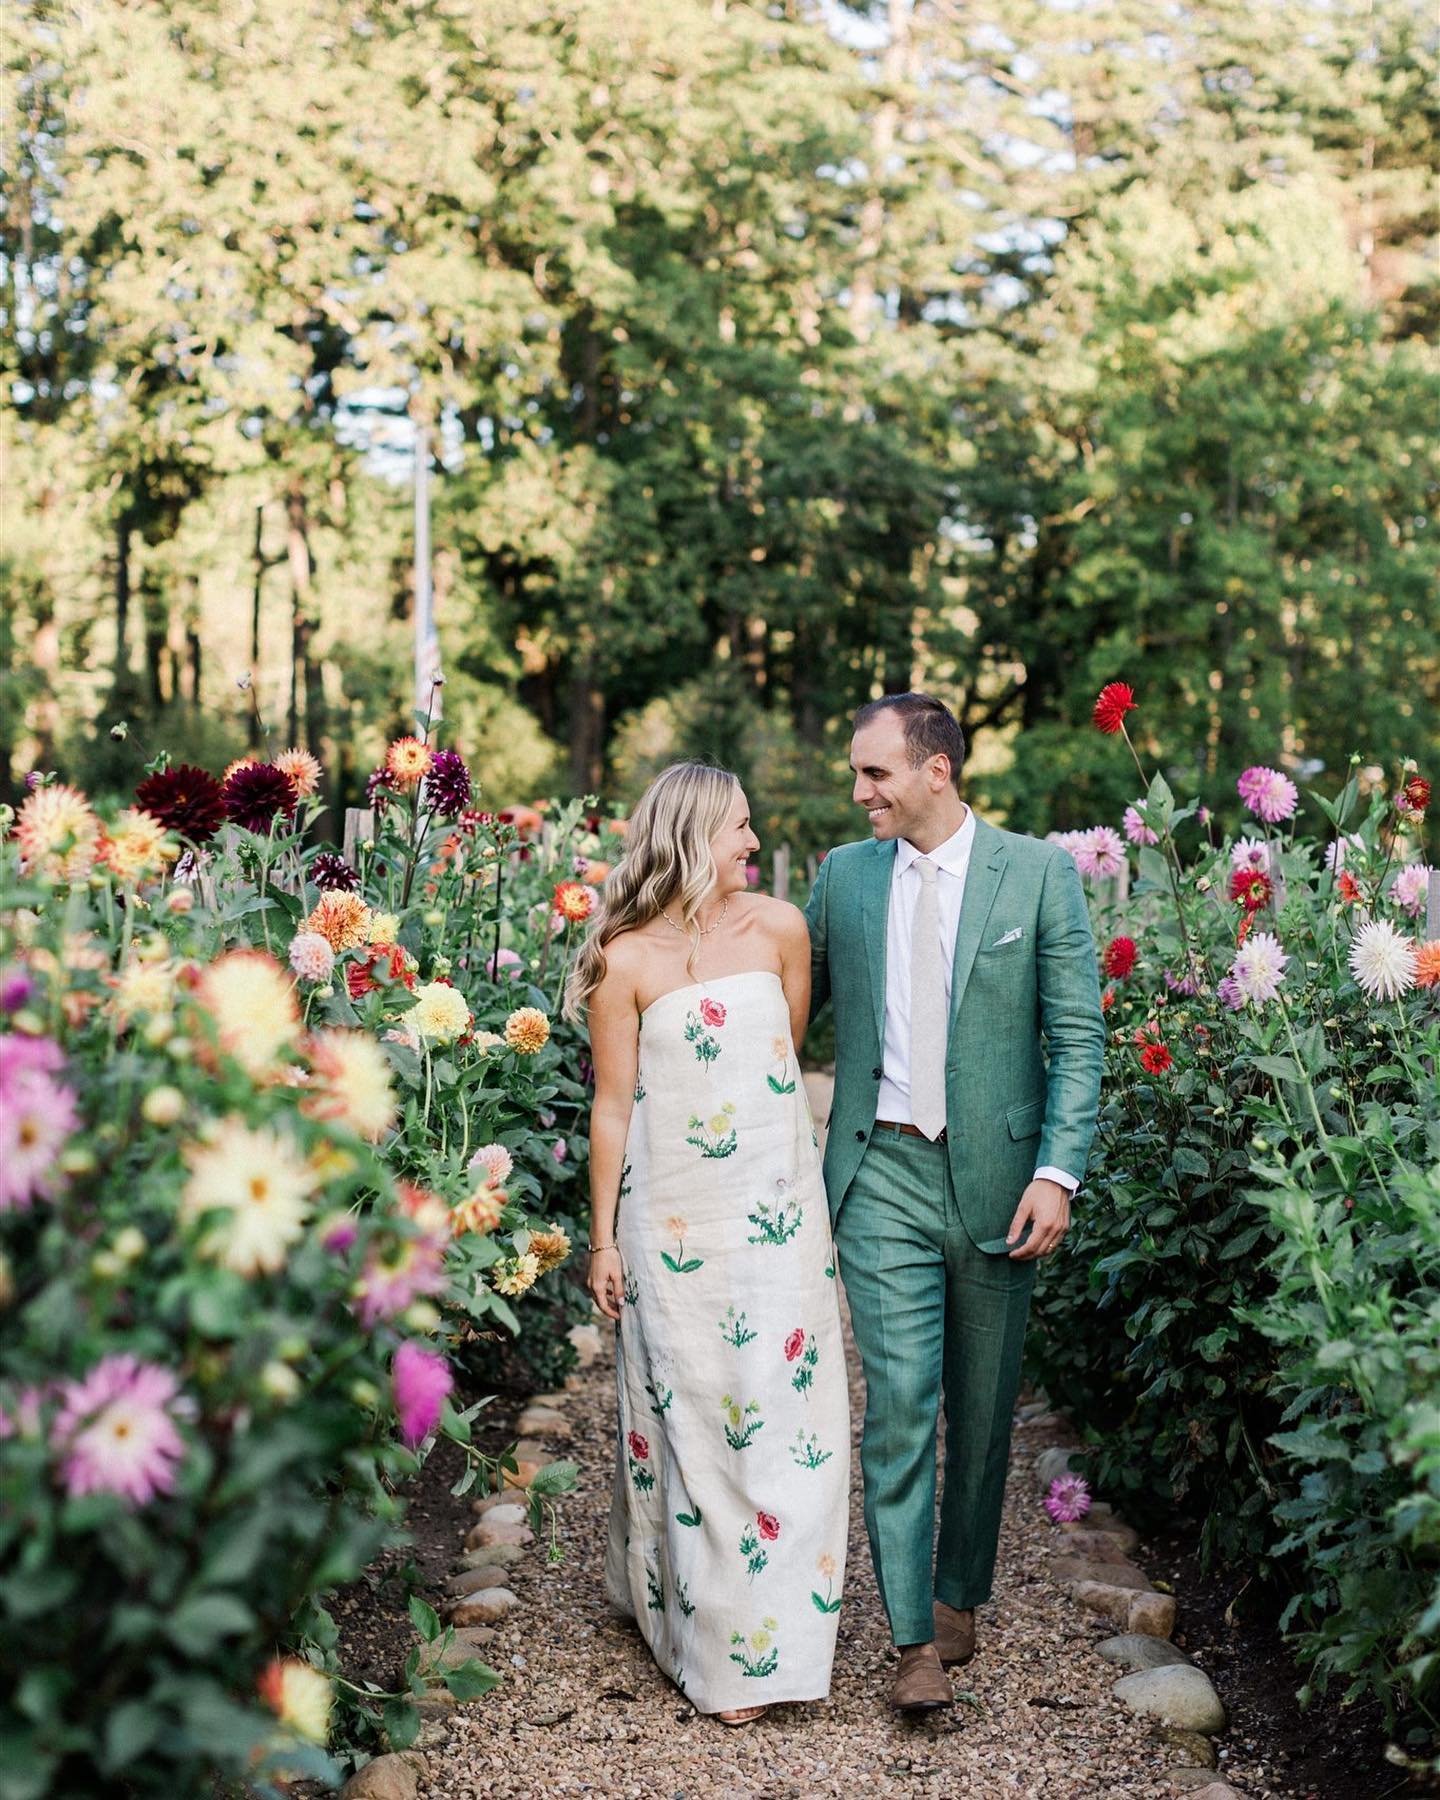 This pre-dinner photo sesh in a dahlia garden was an absolute must. It&rsquo;s hard to think of a better way to have kicked off a wedding weekend at @highhampton. 

Planning &amp; Design (including stationery &amp; florals): @rroseevents
Photography: